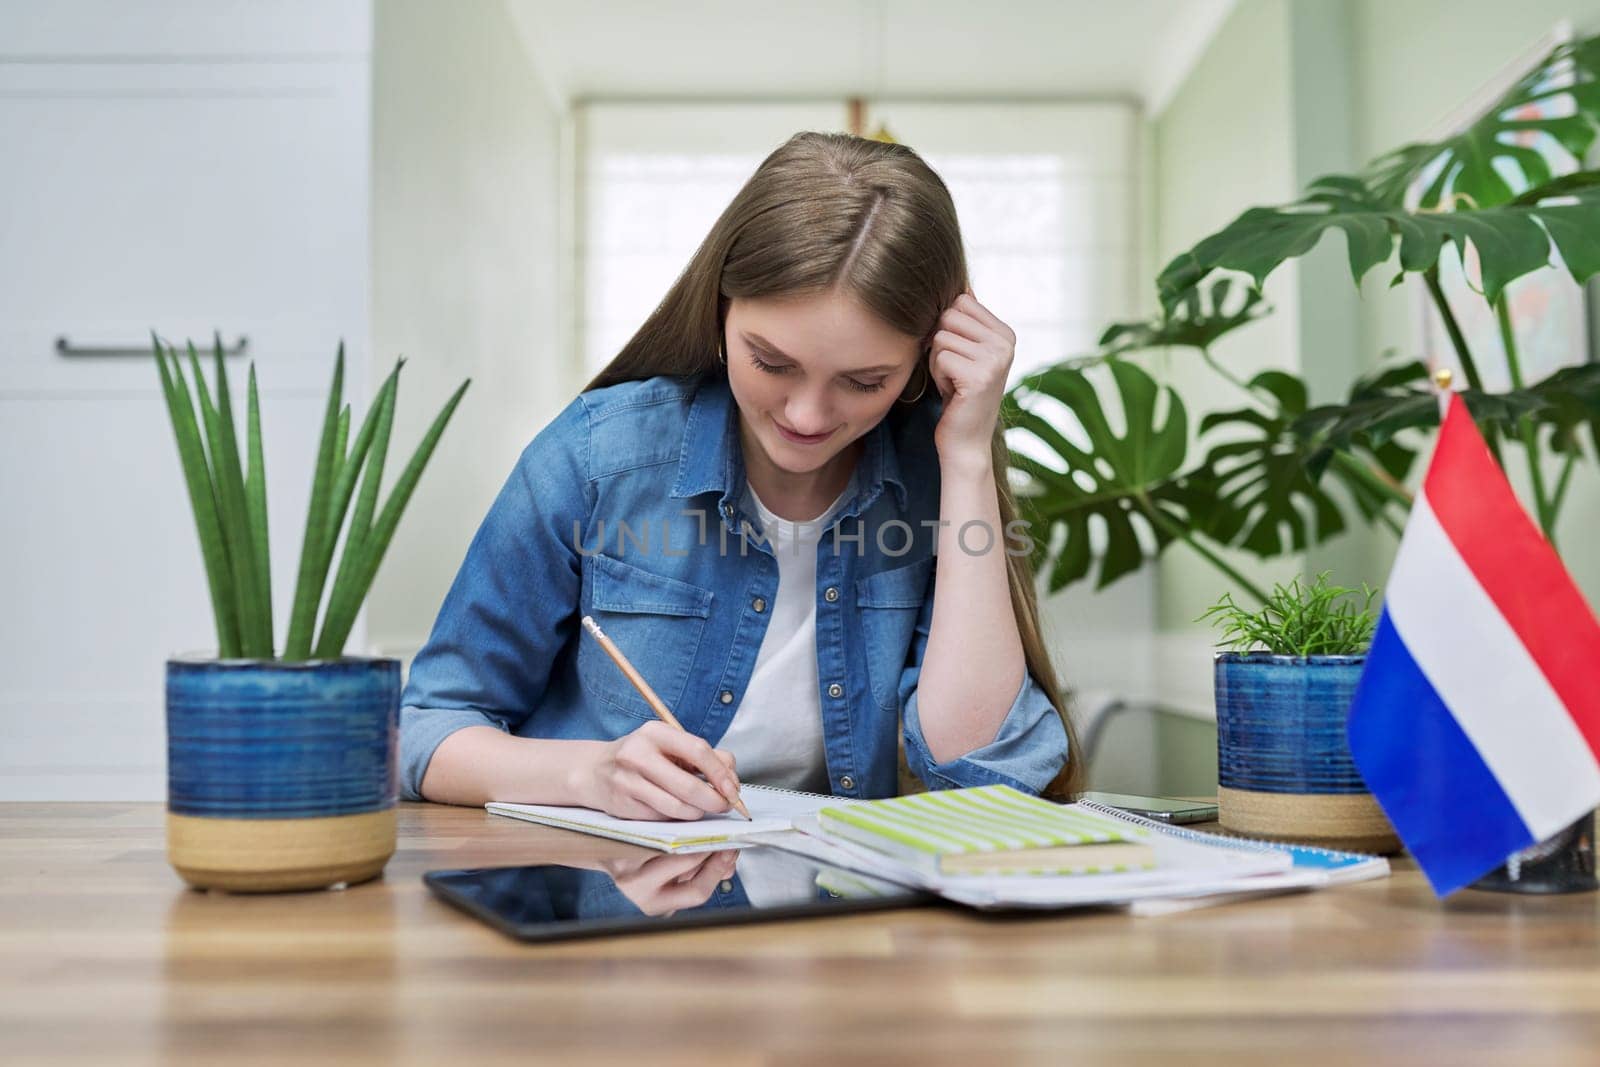 Young female student looking at webcam talking studying or teaching. On table textbooks, flag of Netherlands. Education, university, online learning, remote distant lessons, knowledge people concept